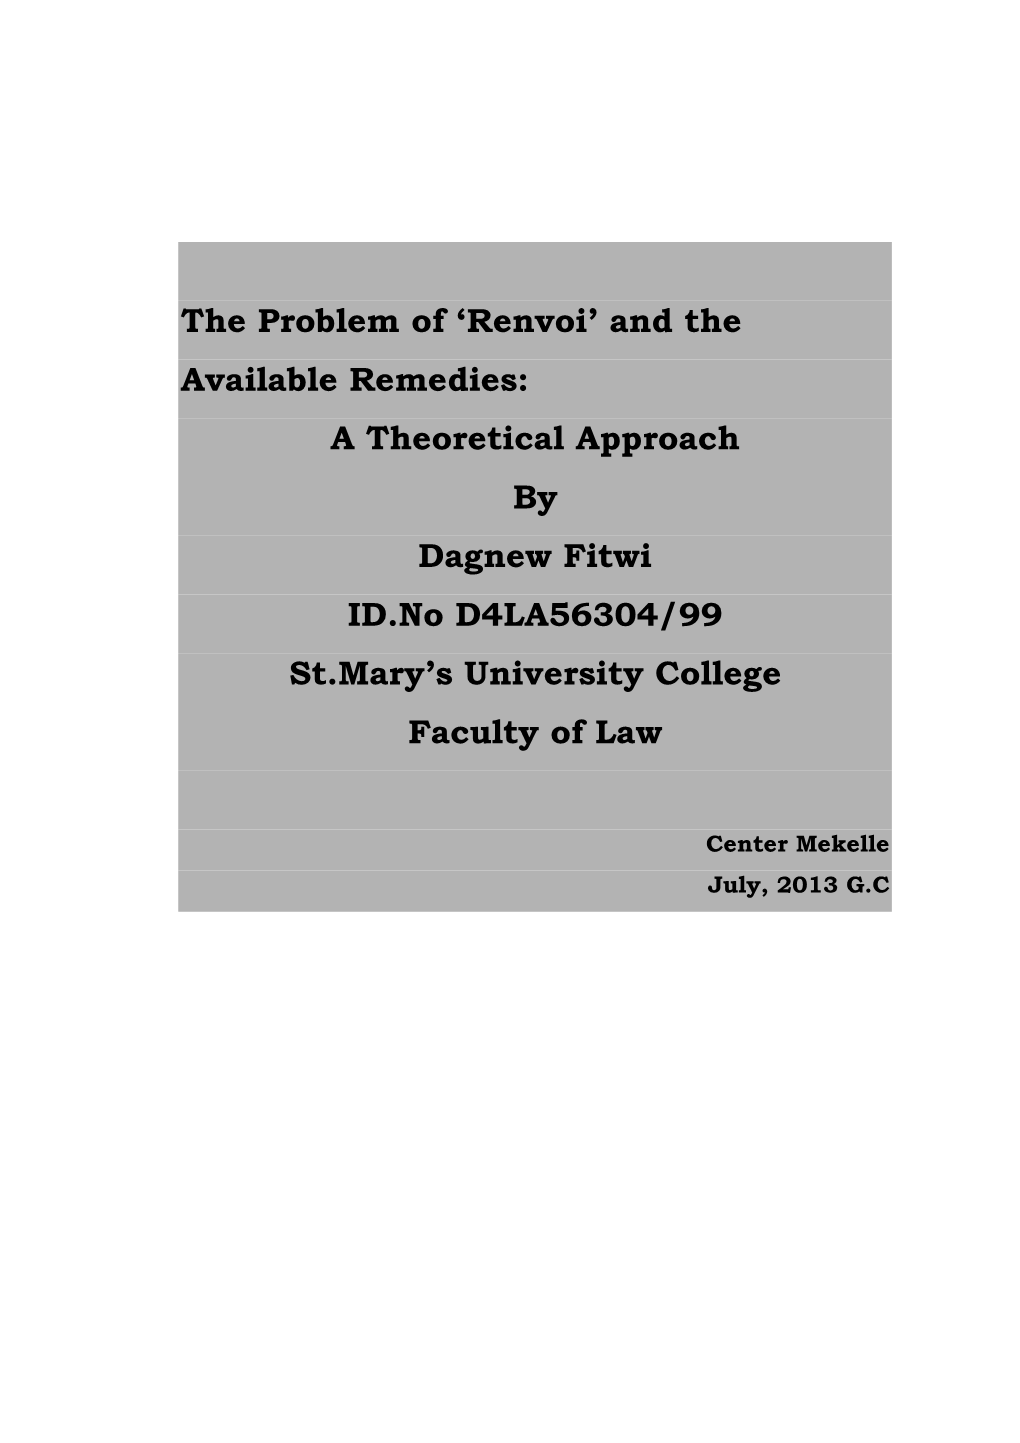 Renvoi’ and the Available Remedies: a Theoretical Approach by Dagnew Fitwi ID.No D4LA56304/99 St.Mary’S University College Faculty of Law